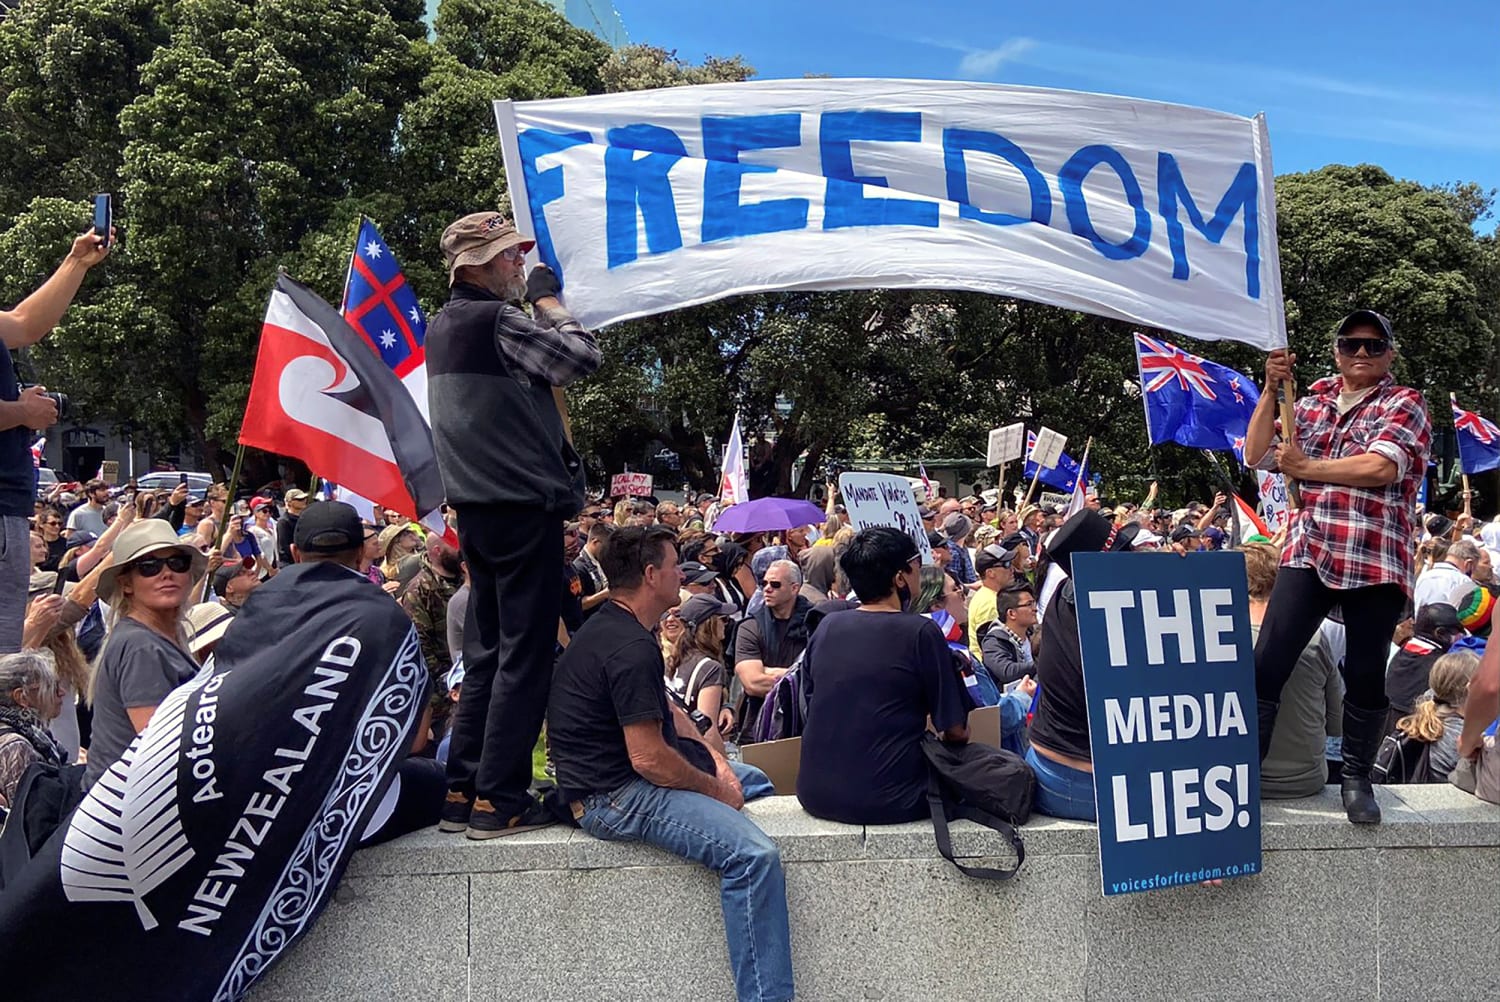 American vaccine disinformation used as ‘Trojan horse’ for far right in New Zealand